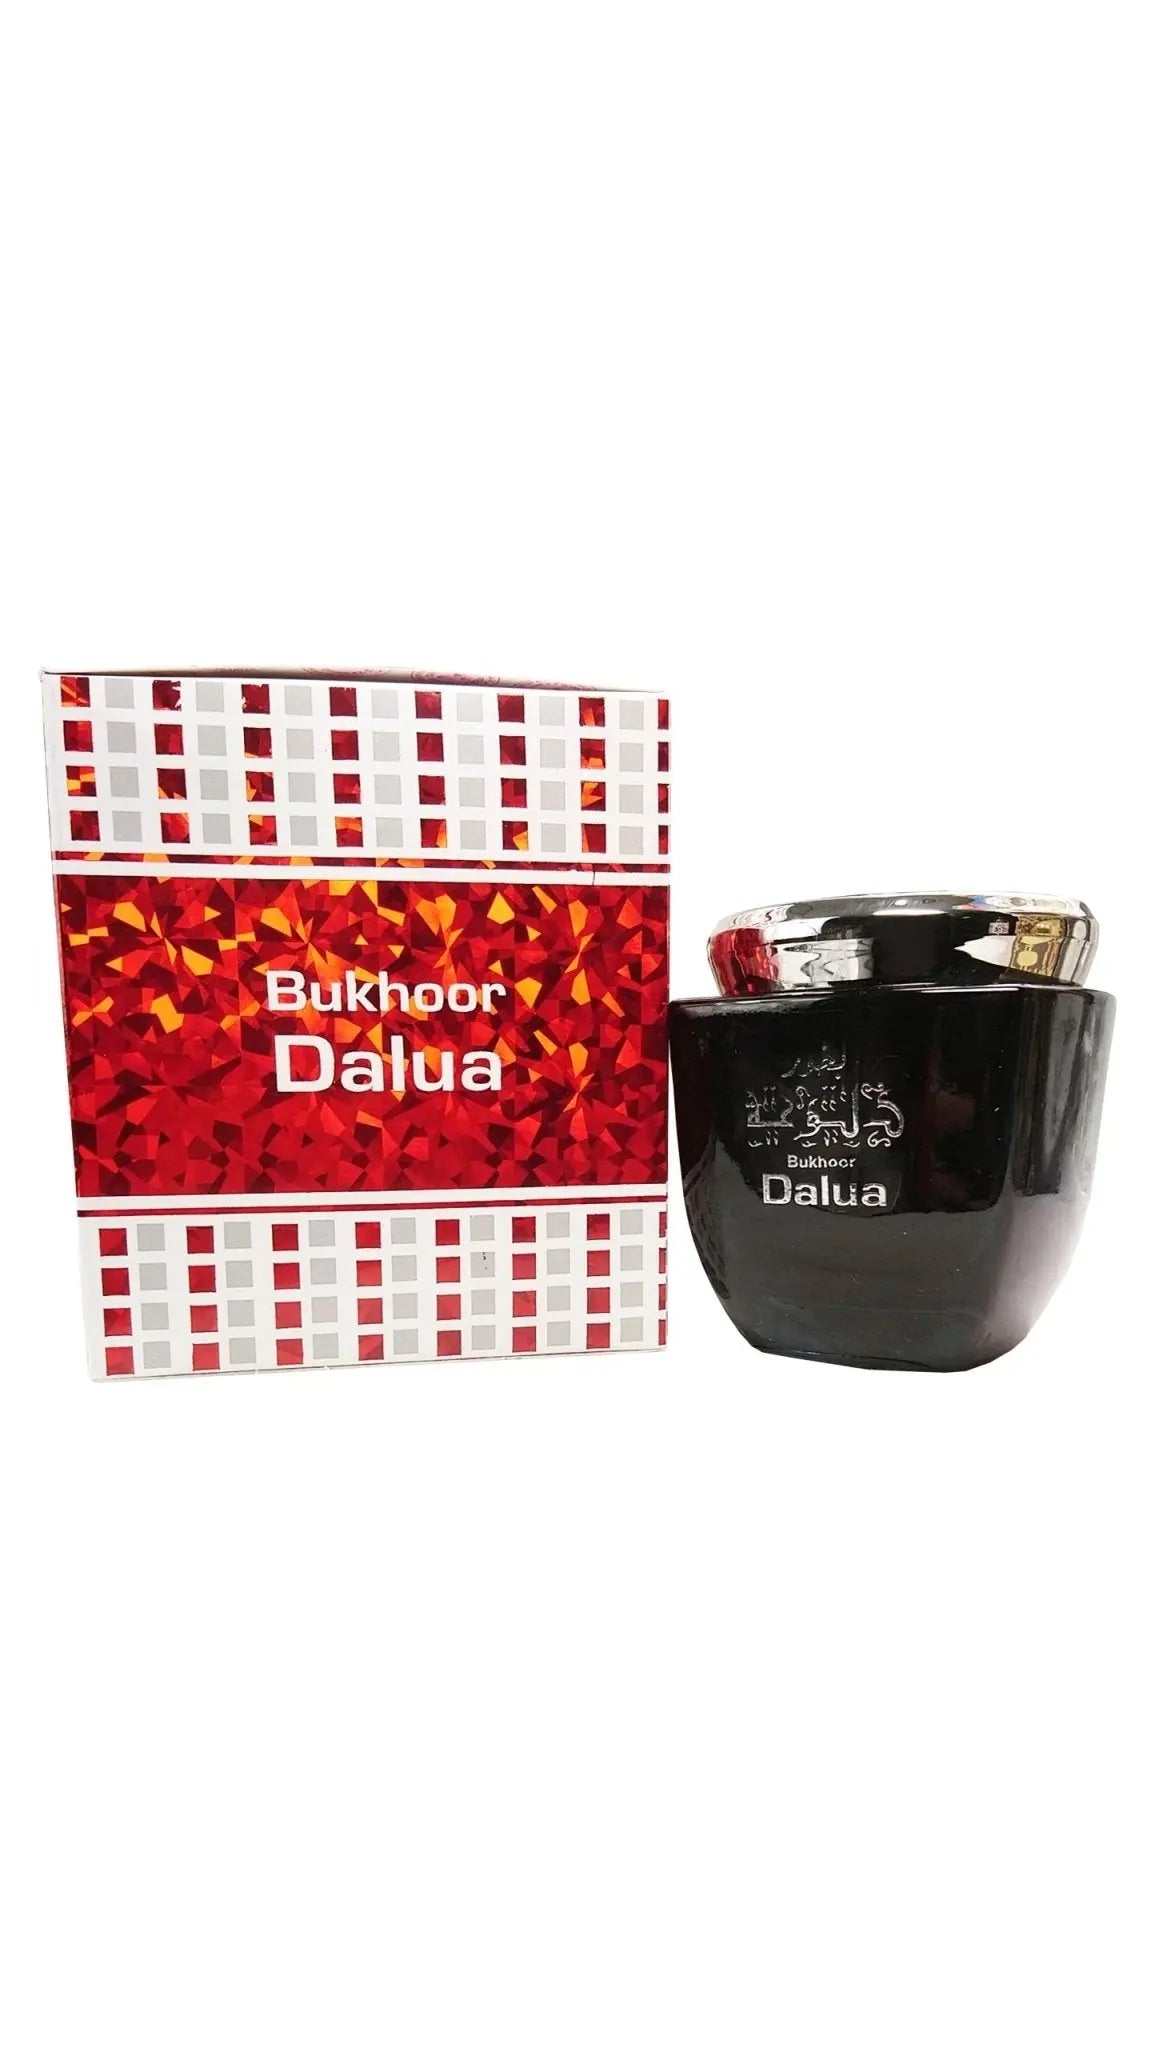 A black jar with a silver lid, labeled "Bukhoor Dalua" in white Arabic and English script, presented next to a packaging box with a mosaic of red and white checkered pattern and a central band featuring the same "Bukhoor Dalua" branding. This product is typically used in Middle Eastern cultures as incense to scent rooms and clothing, and the presentation suggests a modern take on traditional bakhoor.